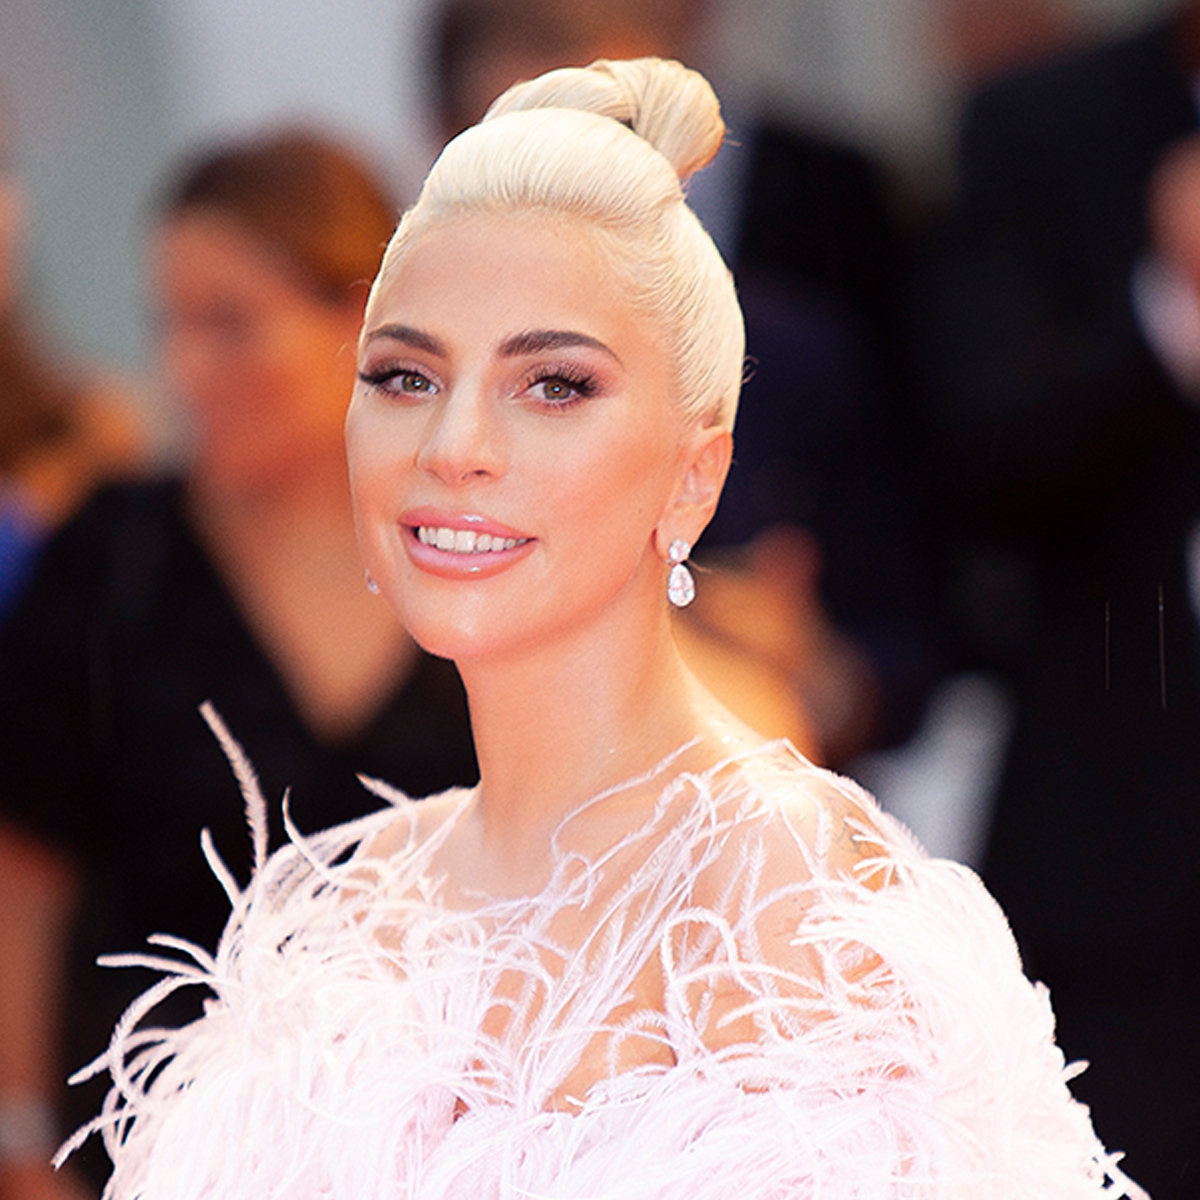 The Simple Way Lady Gaga Gives Herself an "Extra Boost of Confidence" thumbnail